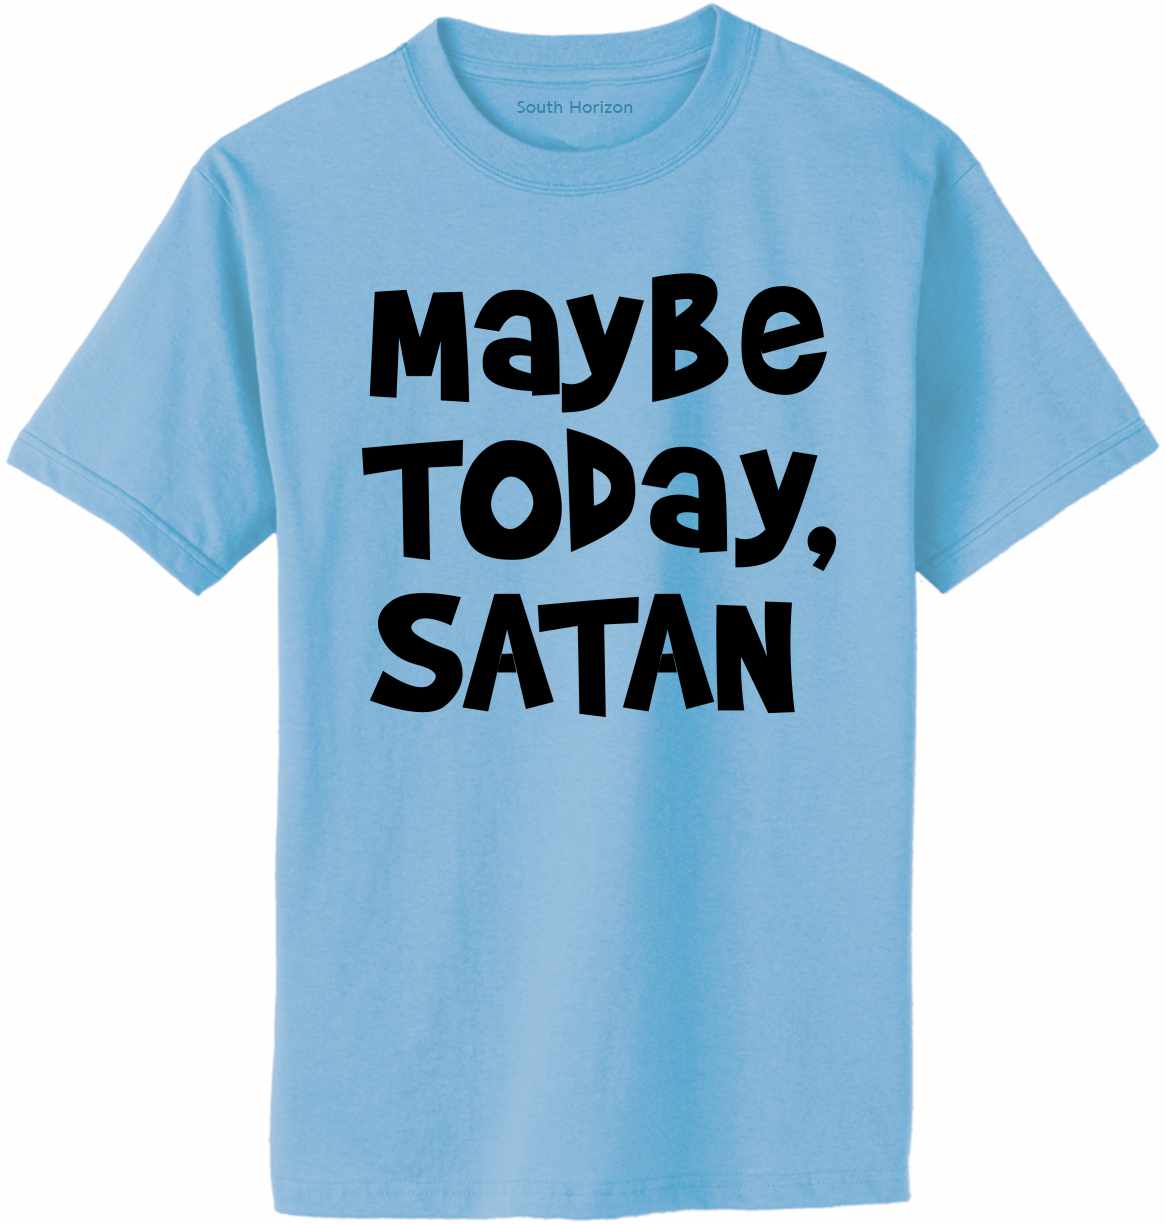 Maybe Today, Satan on Adult T-Shirt (#1224-1)